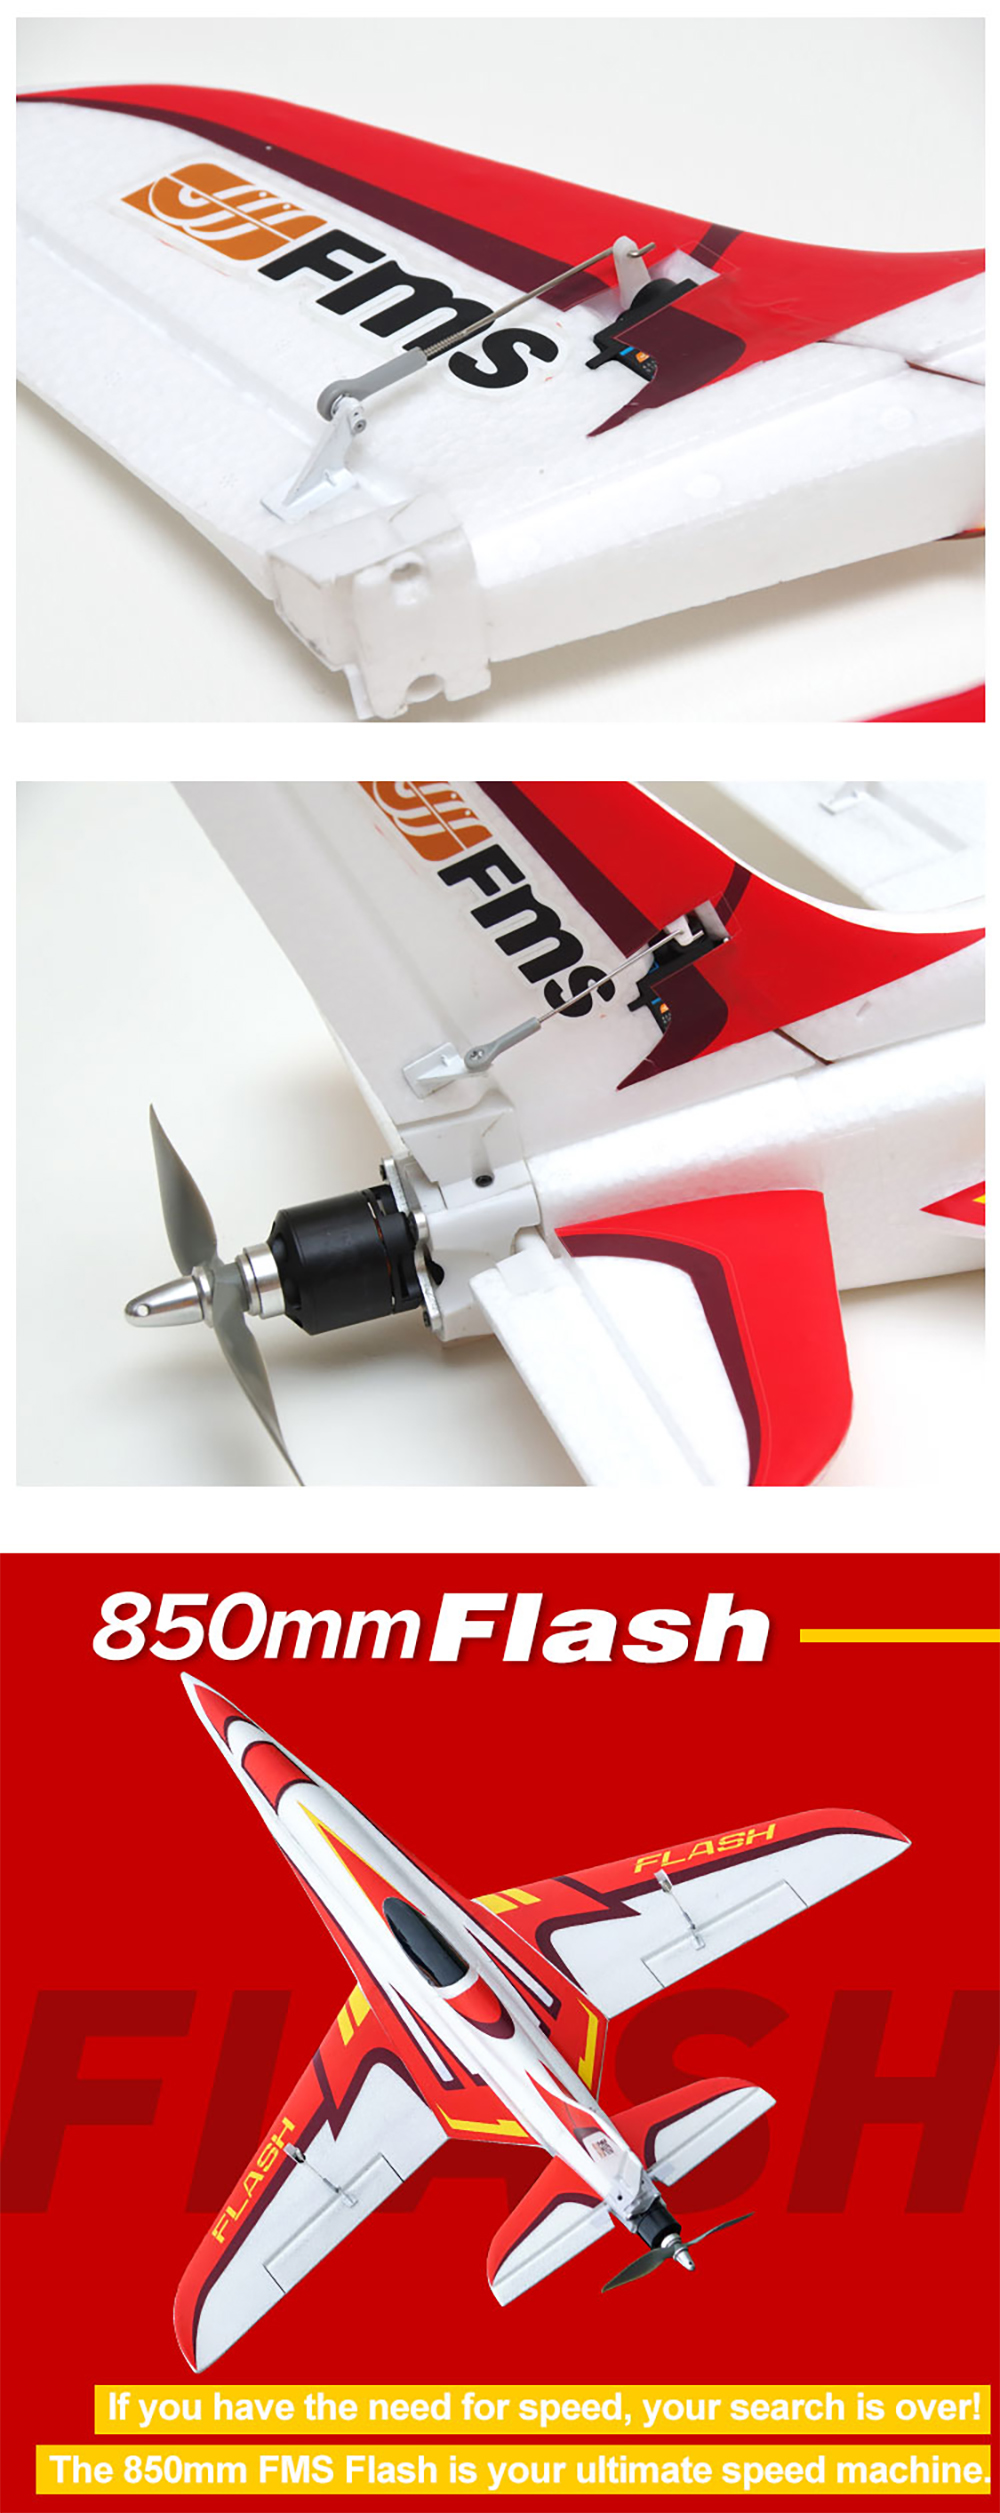 FMS-850mm-Wingspan-Flash-High-Speed-180kmh-4S-Racer-EPO-RC-Airplane-PNP-with-Reflex-Stabilizer-Fligh-1774714-12